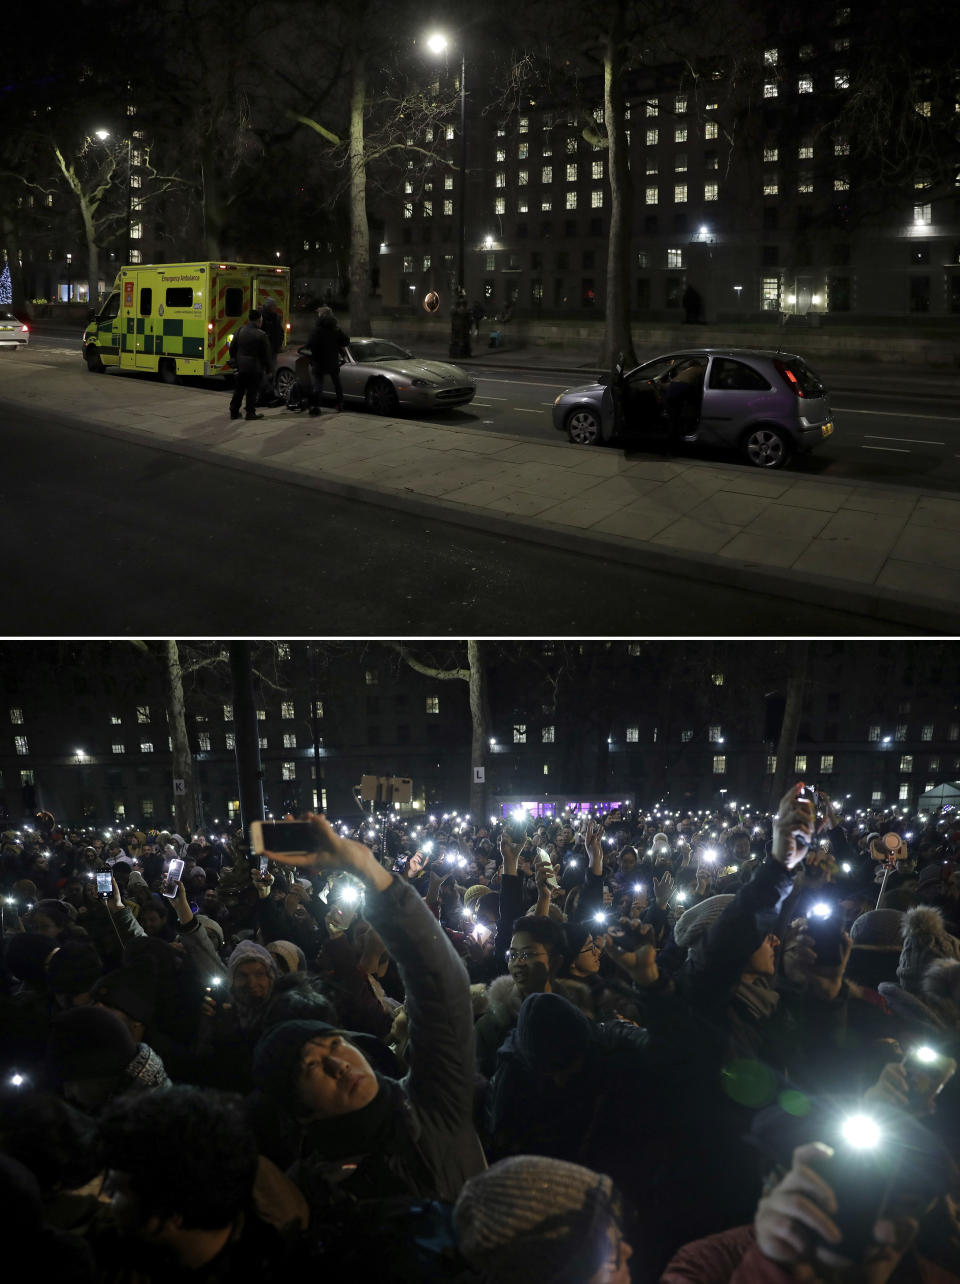 In this combo of image which shows at top, an ambulance and press photographers waiting on the otherwise empty street opposite the London Eye Ferris wheel in London, Thursday, Dec. 31, 2020, and in the bottom photo taken in the same place, people waiting to take photos of fireworks over the London Eye Ferris wheel, as midnight approaches, Tuesday, Dec. 31, 2019 .(AP Photo/Matt Dunham)